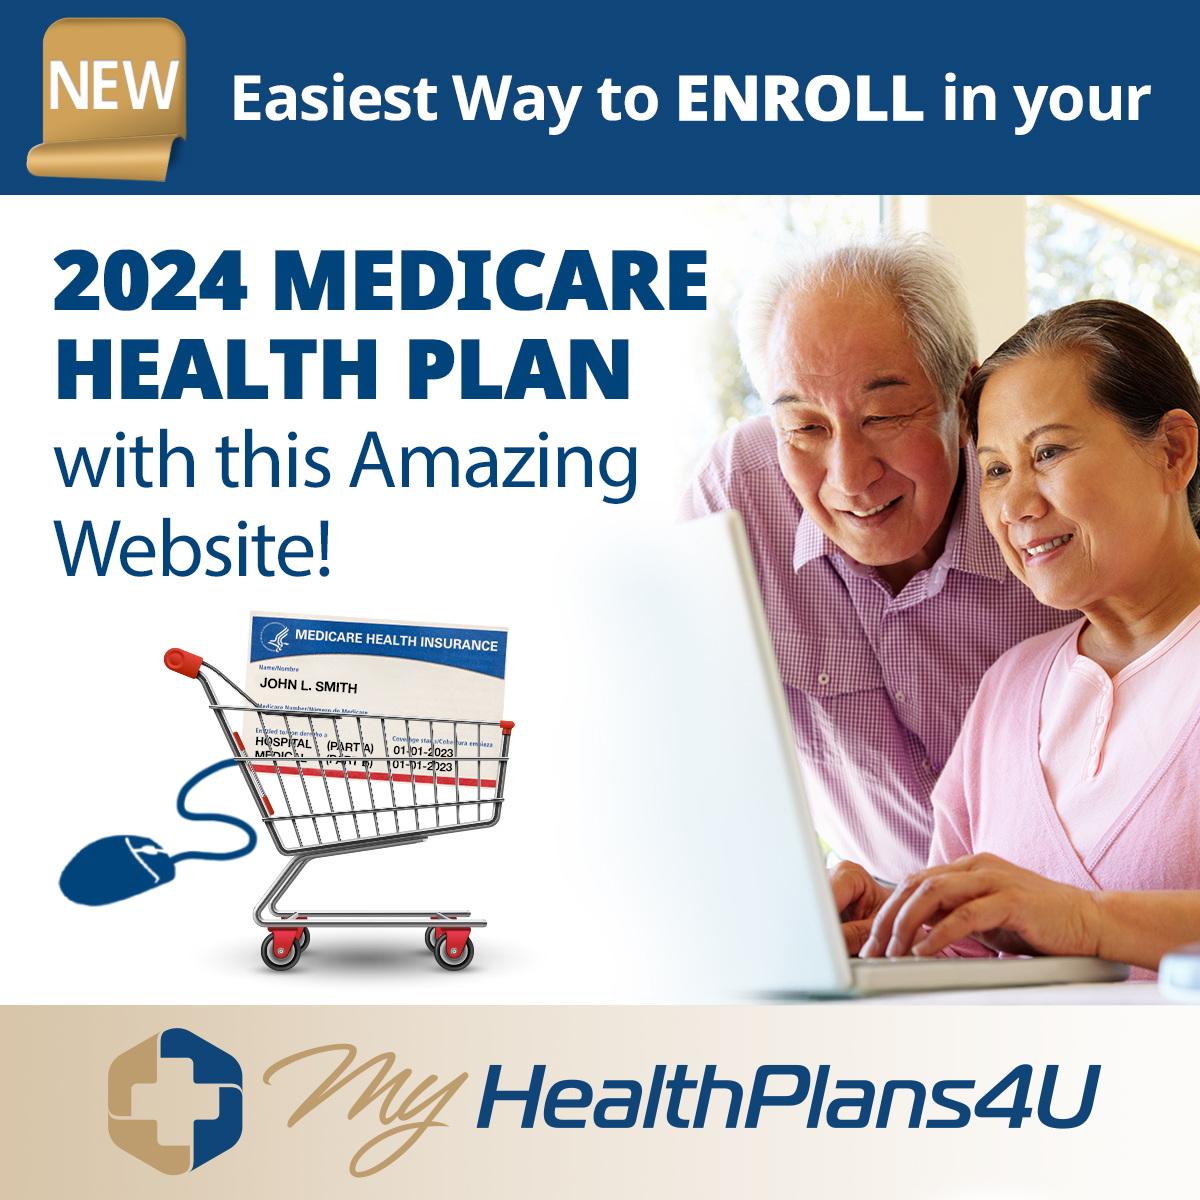 New. The easiest way to enroll in your 2023 Medicare health plan with this amazing website. My Medicare App